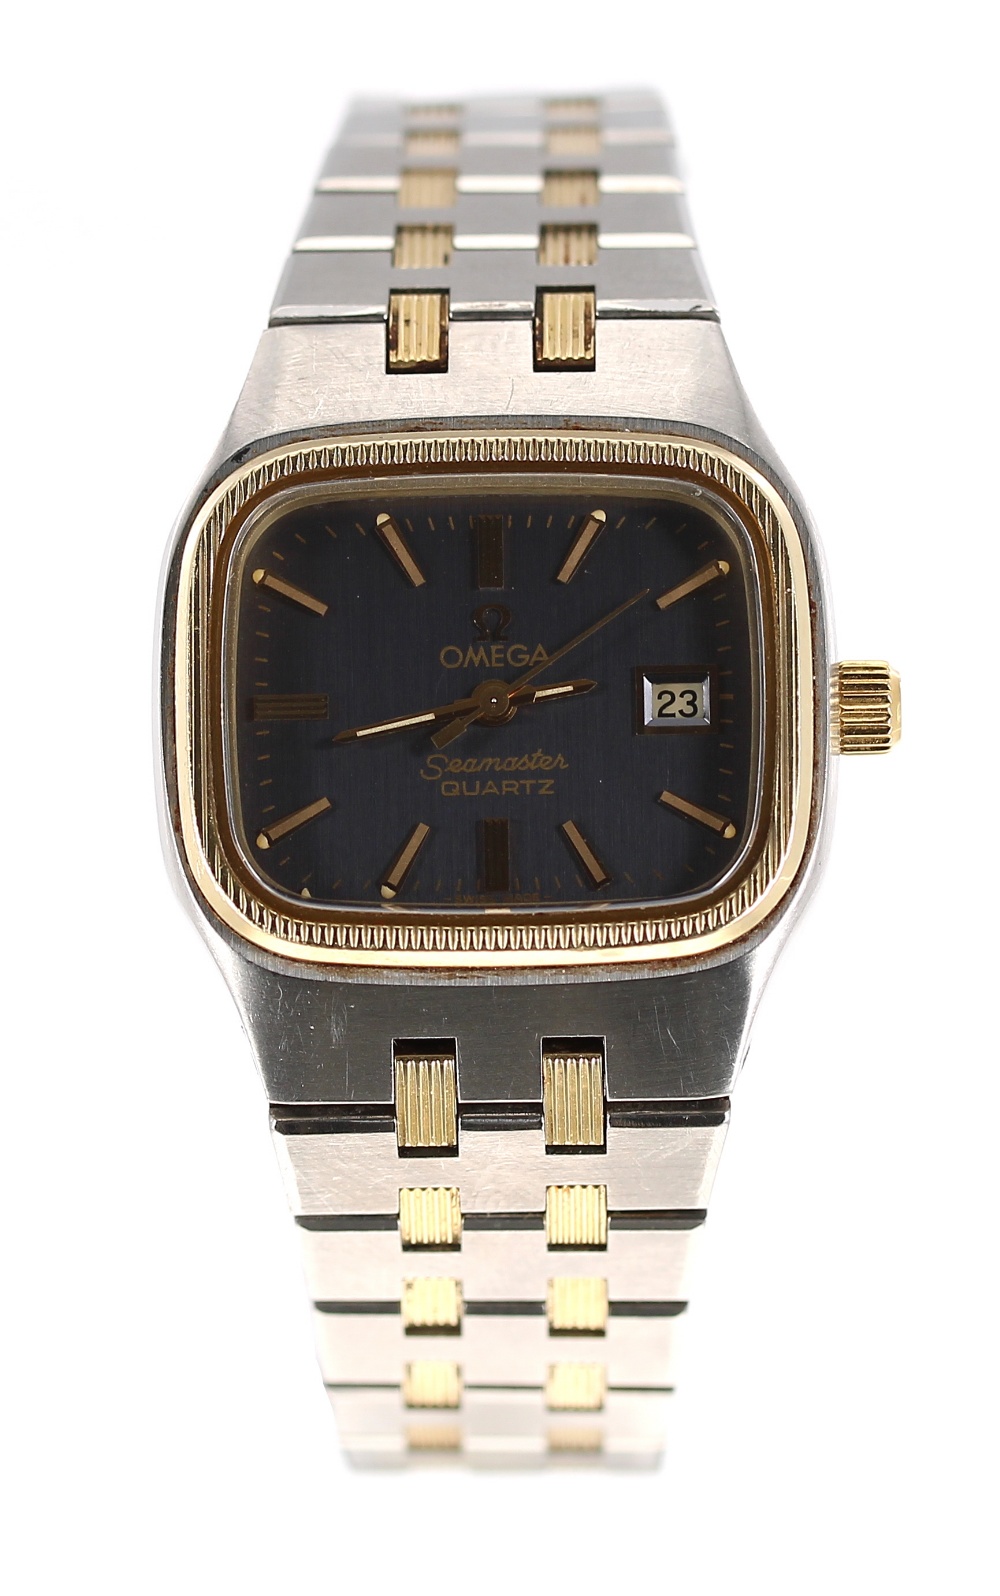 Omega Seamaster Quartz Damenuhr gold and stainless steel lady's bracelet watch, ref. 596.0019, the